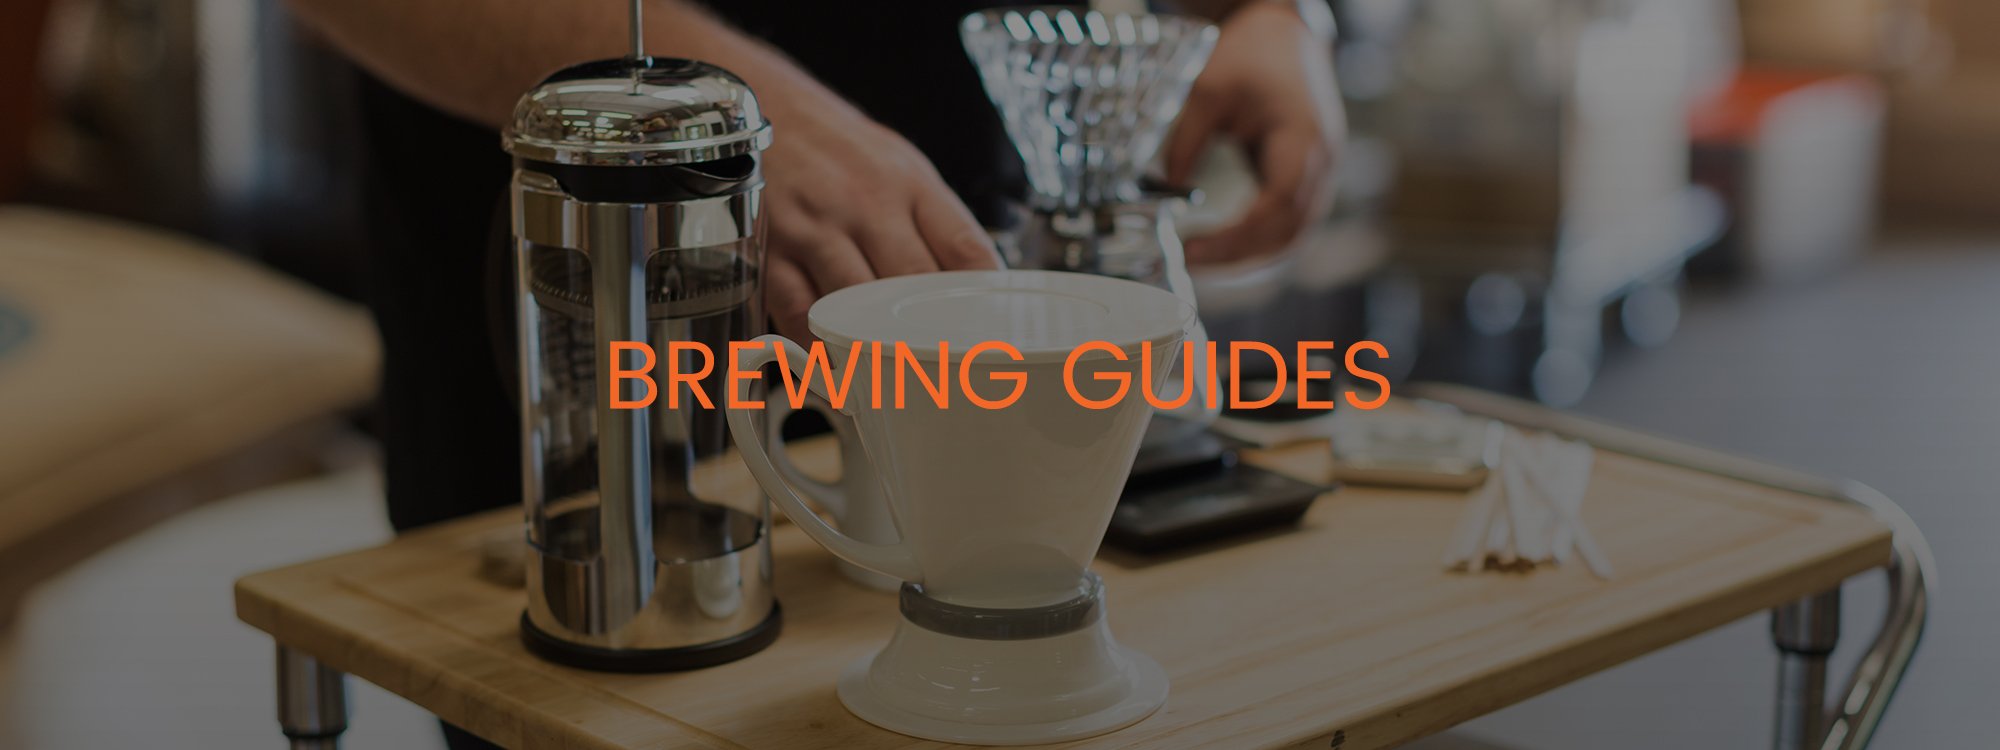 BREWING GUIDES